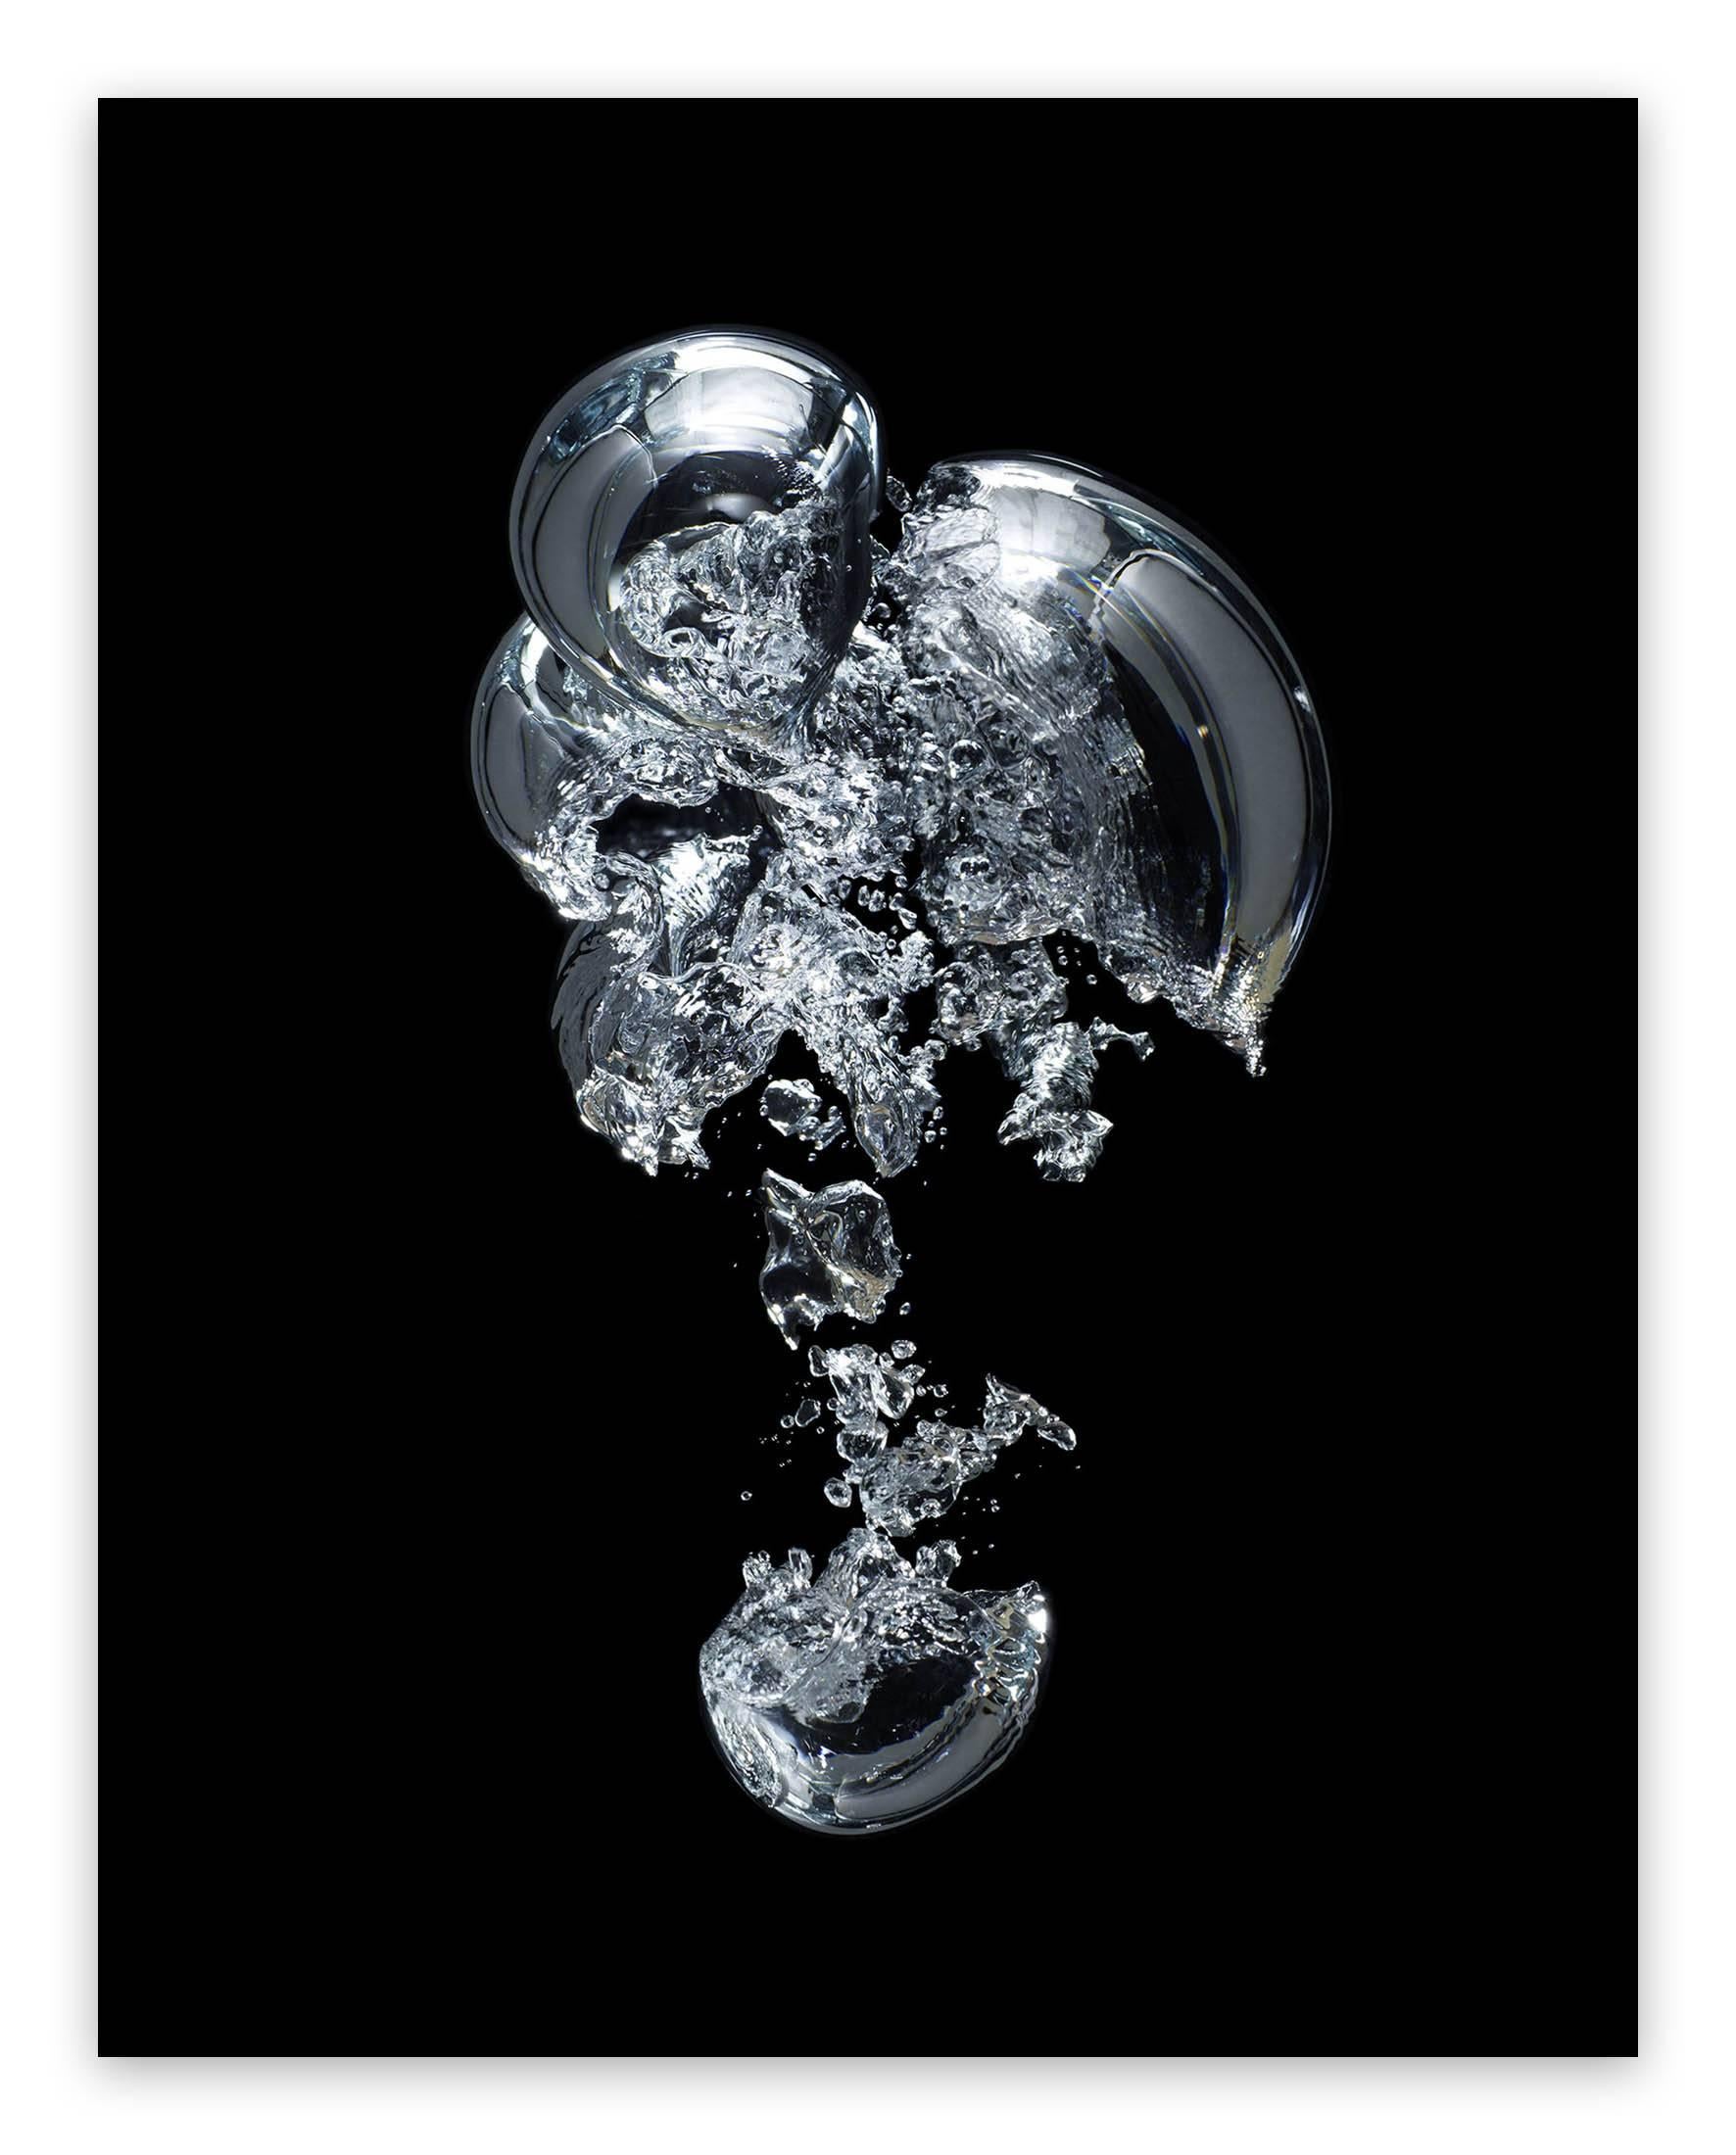 Seb Janiak Black and White Photograph - Gravity Bulle d'air 01  (Abstract Photography)